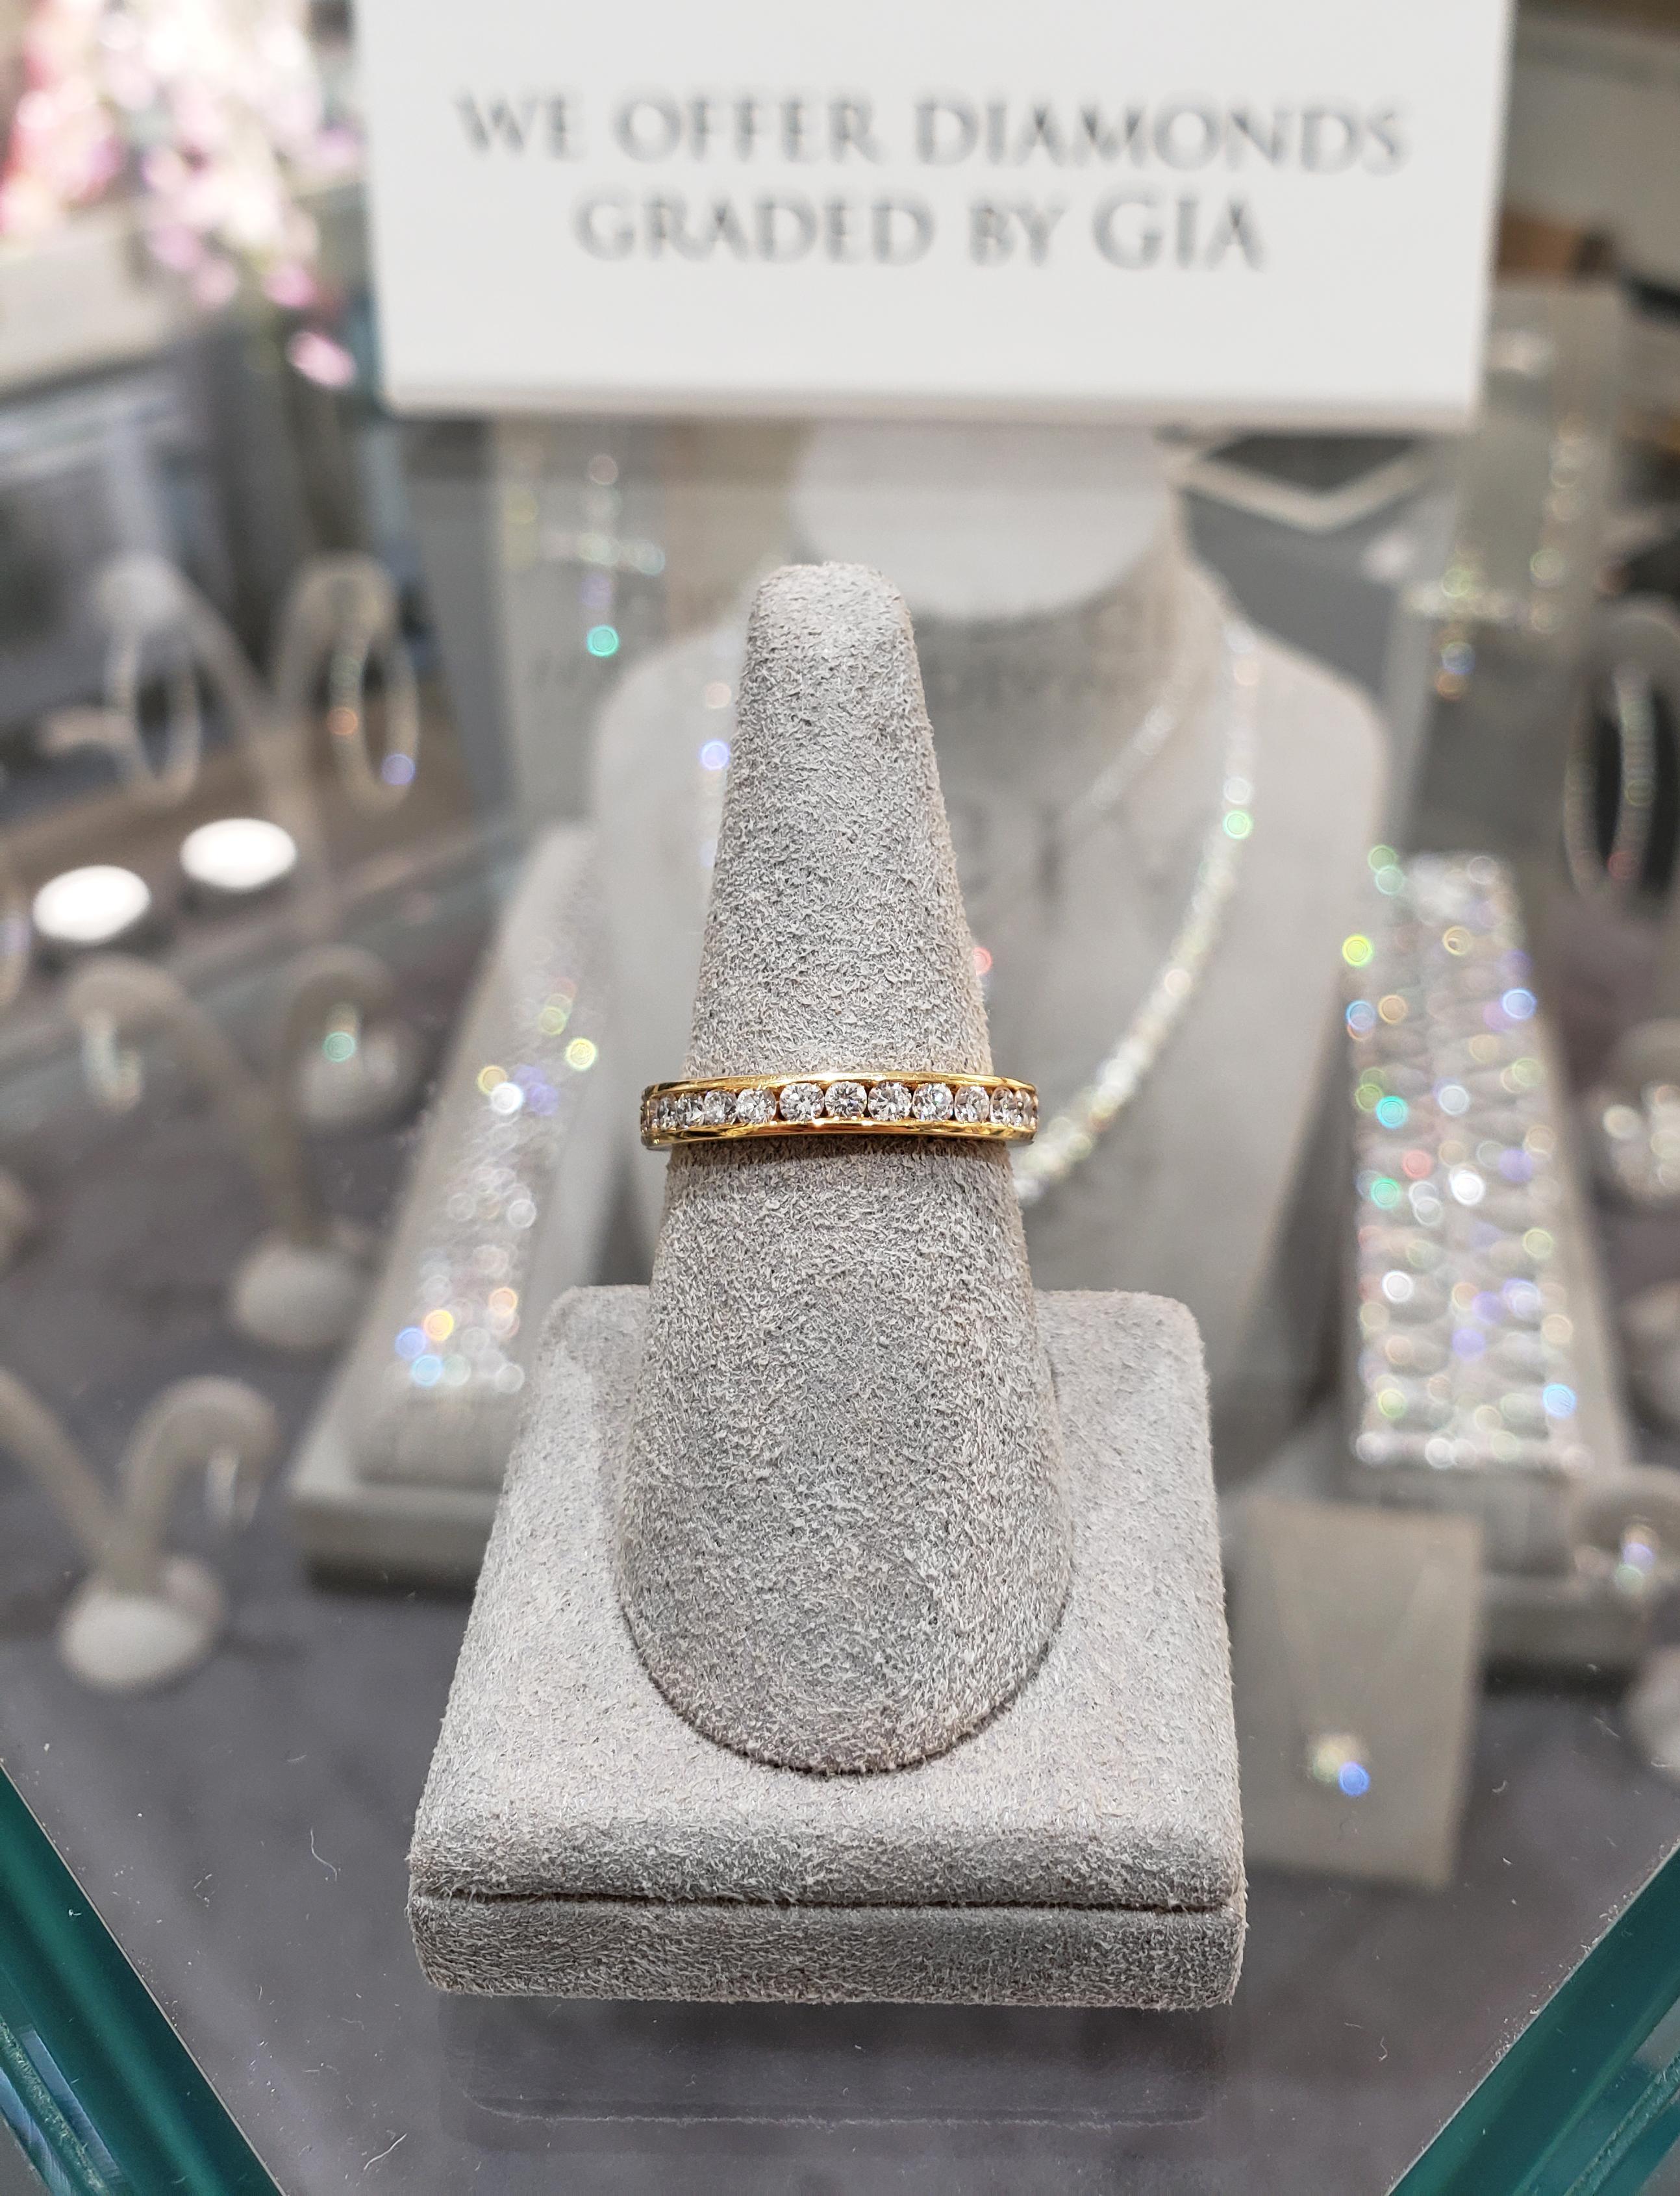 A modern eternity wedding band ring, showcasing brilliant diamonds of 1.08 carats total. Channel set and made with 18K yellow gold. Size 5.25 US.

Roman Malakov is a custom house, specializing in creating anything you can imagine. If you would like